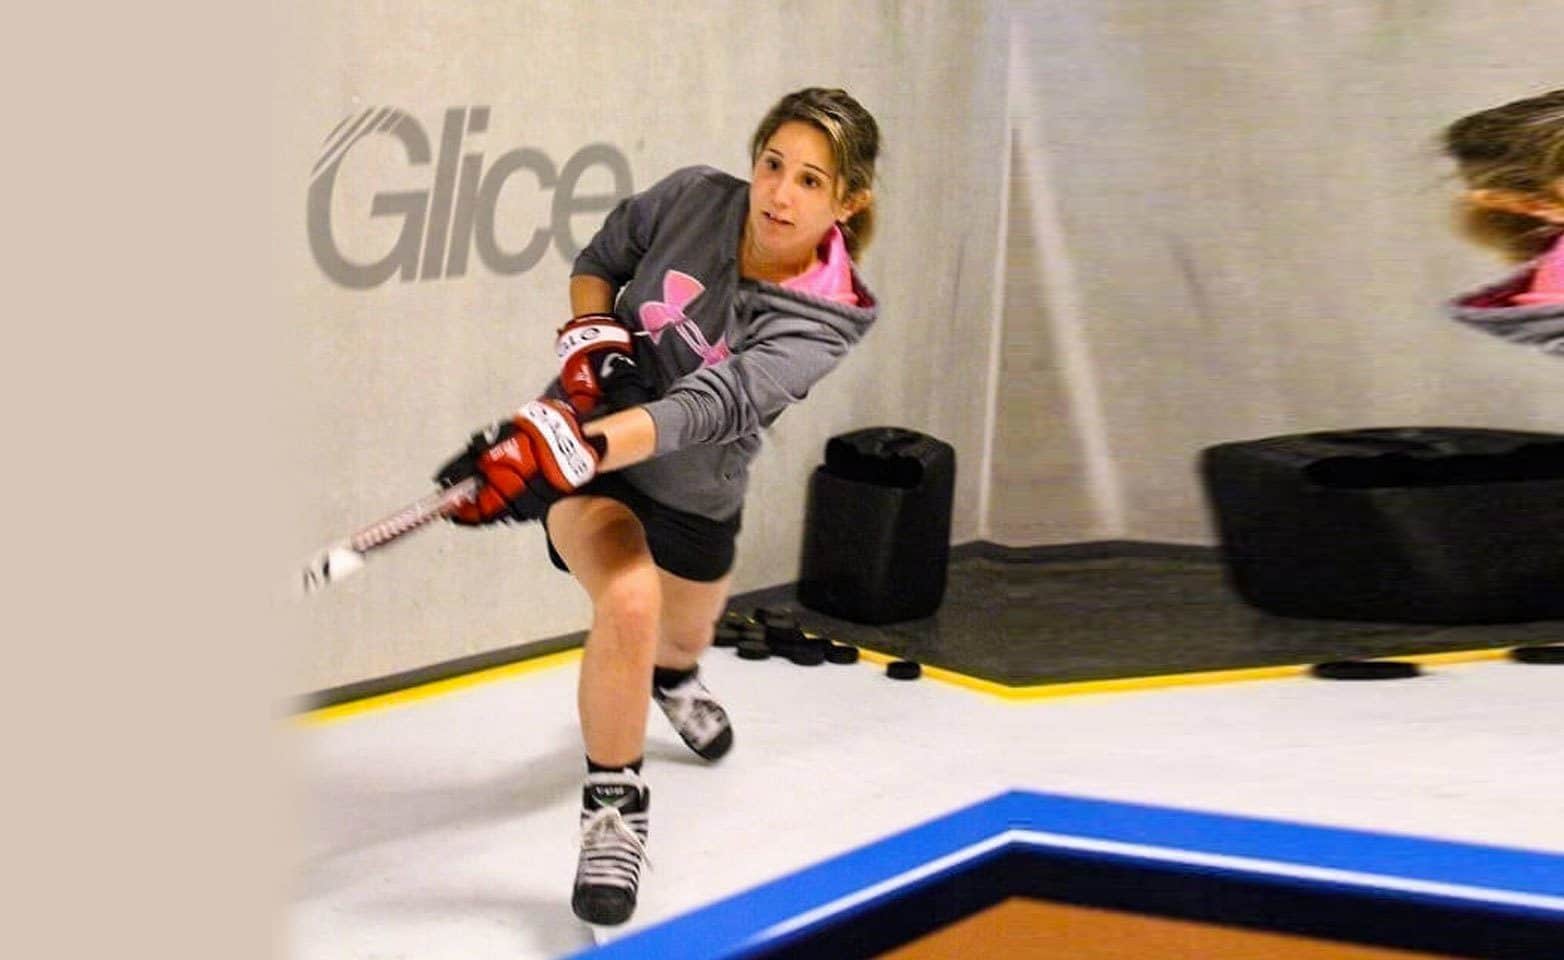 Female hockey player practicing on synthetic ice pad